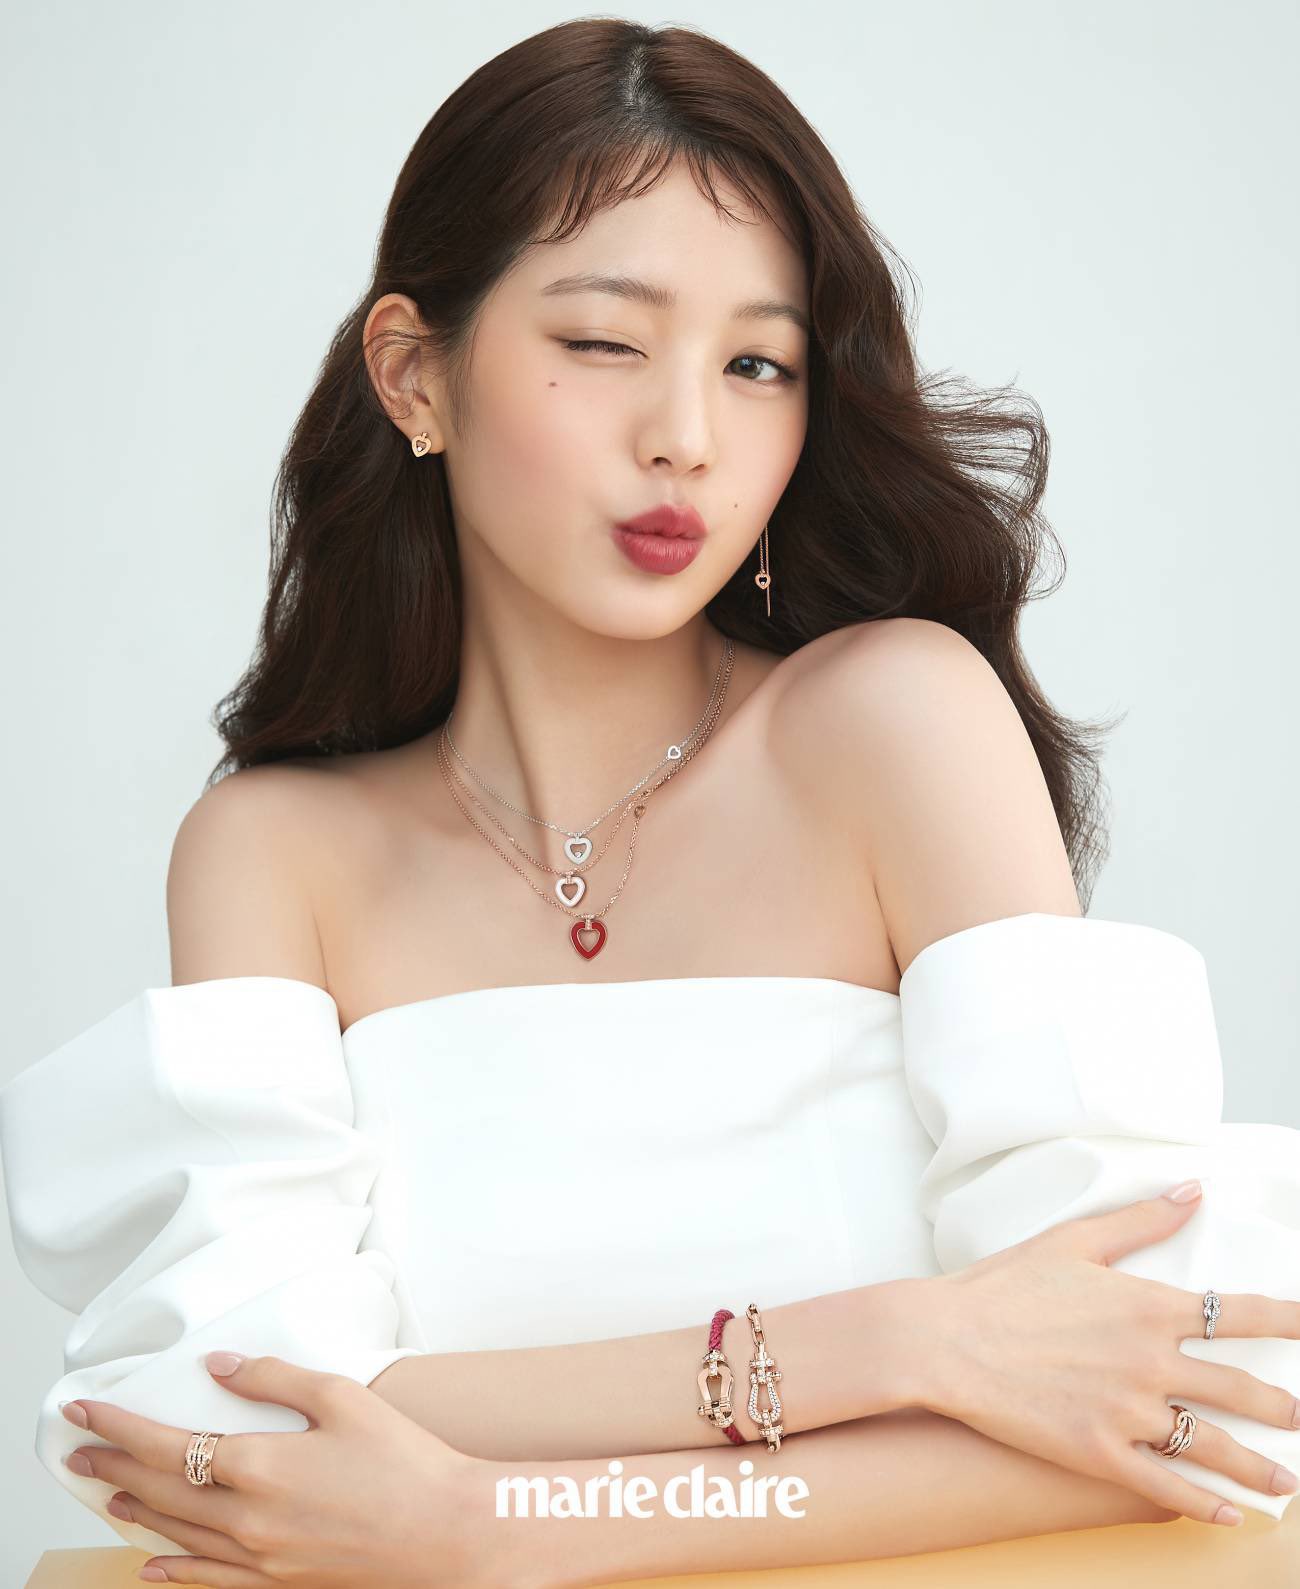 IVE Wonyoung for W Korea x Fred Jewelry